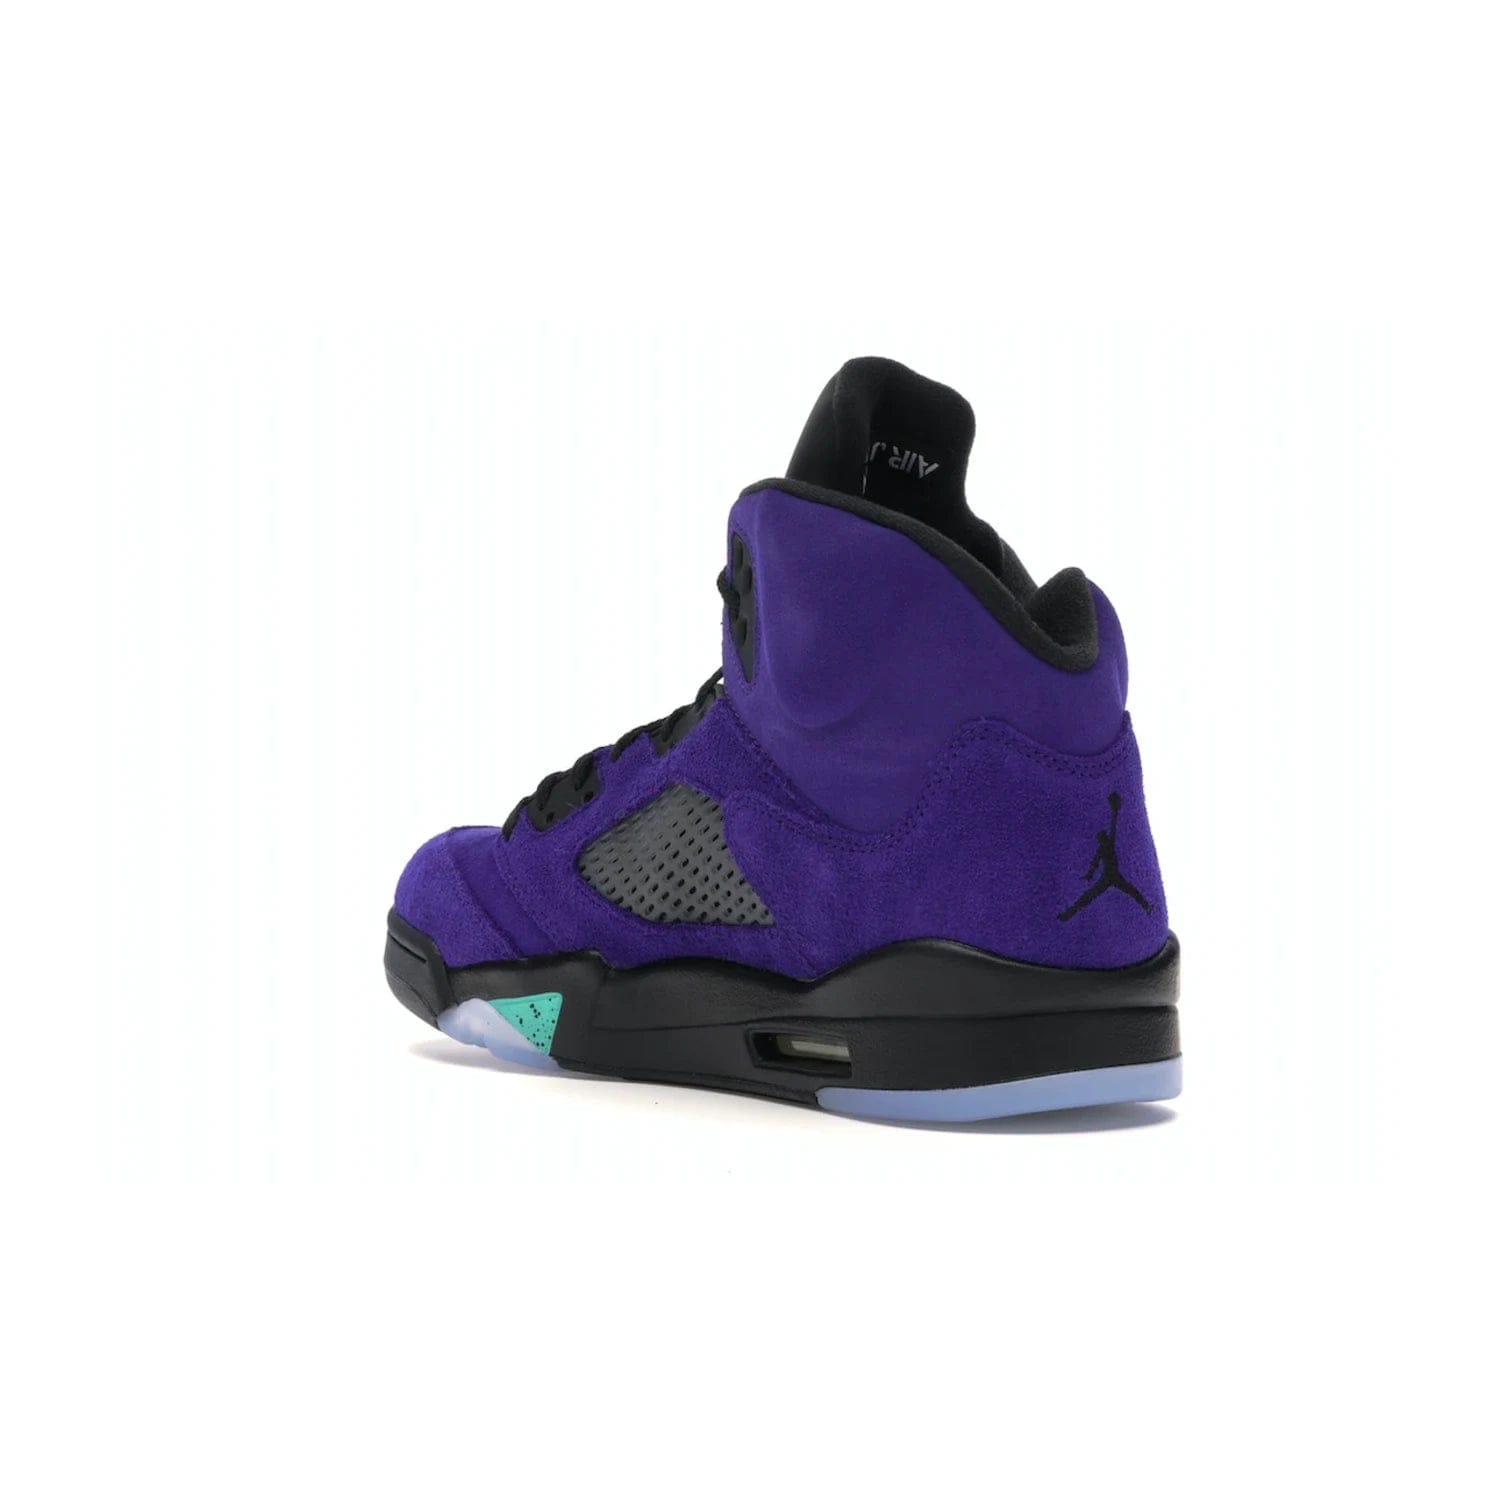 Jordan 5 Retro Alternate Grape - Image 24 - Only at www.BallersClubKickz.com - Bring the classic Jordan 5 Retro Alternate Grape to your sneaker collection! Featuring a purple suede upper, charcoal underlays, green detailing, and an icy and green outsole. Releasing for the first time since 1990, don't miss this chance to add a piece of sneaker history to your collection.